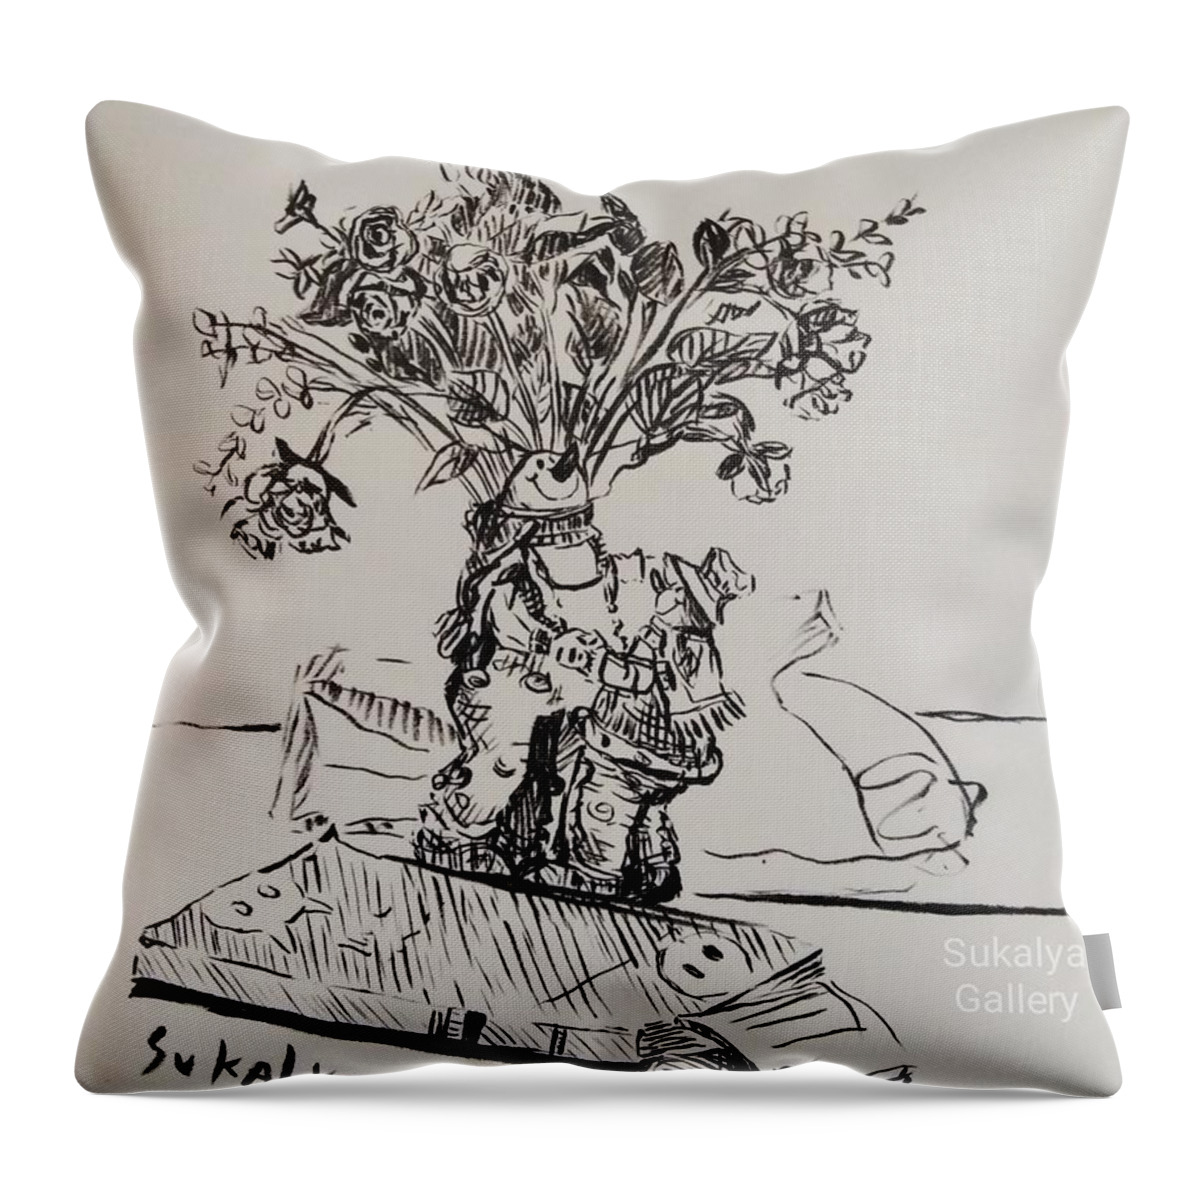 Snowman Vase Throw Pillow featuring the drawing On the Table by Sukalya Chearanantana